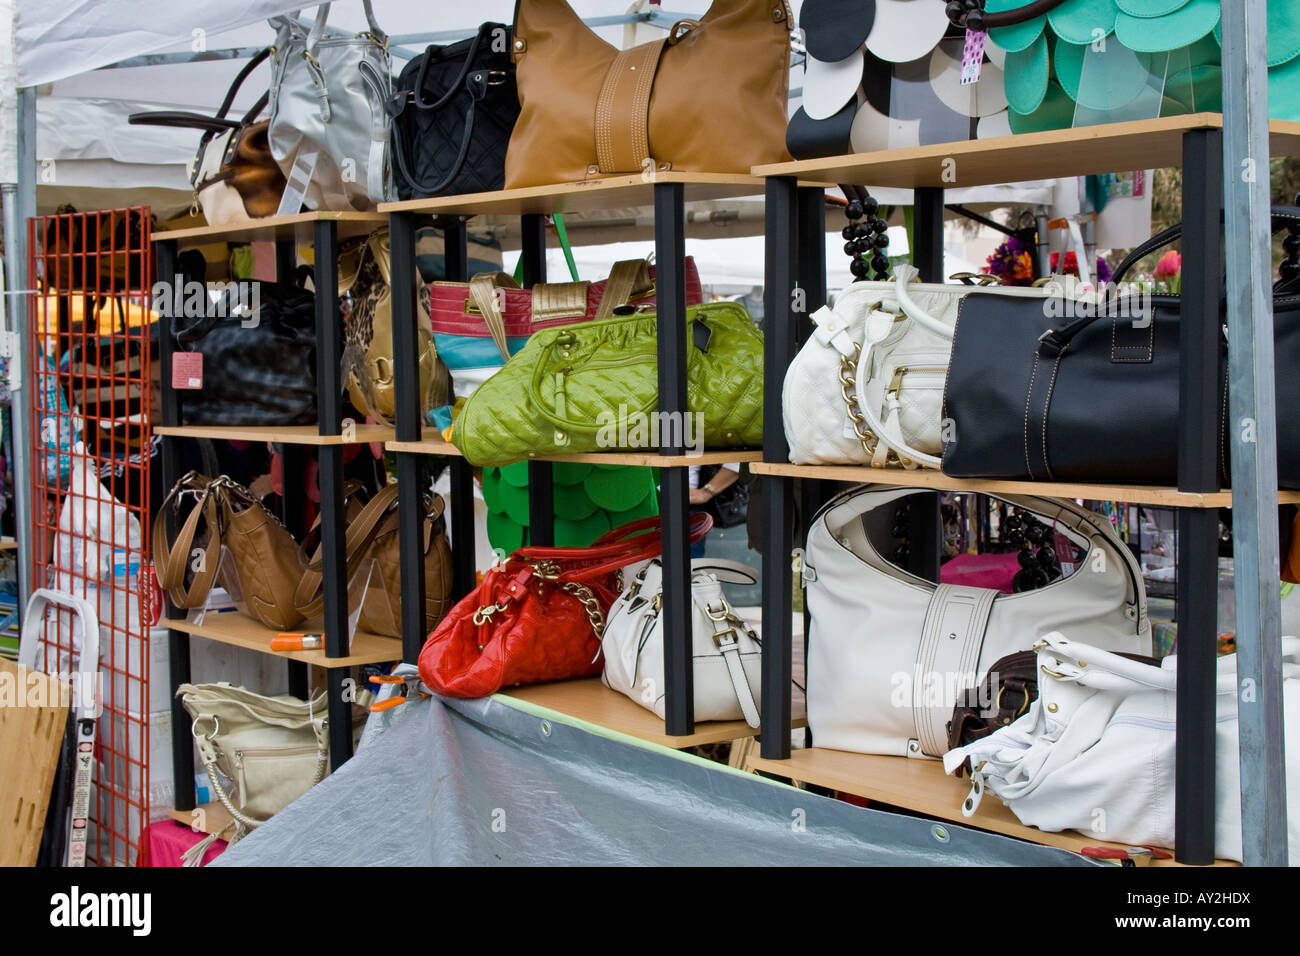 Display of multi-colored purses on three wooden racks for sale Stock Photo